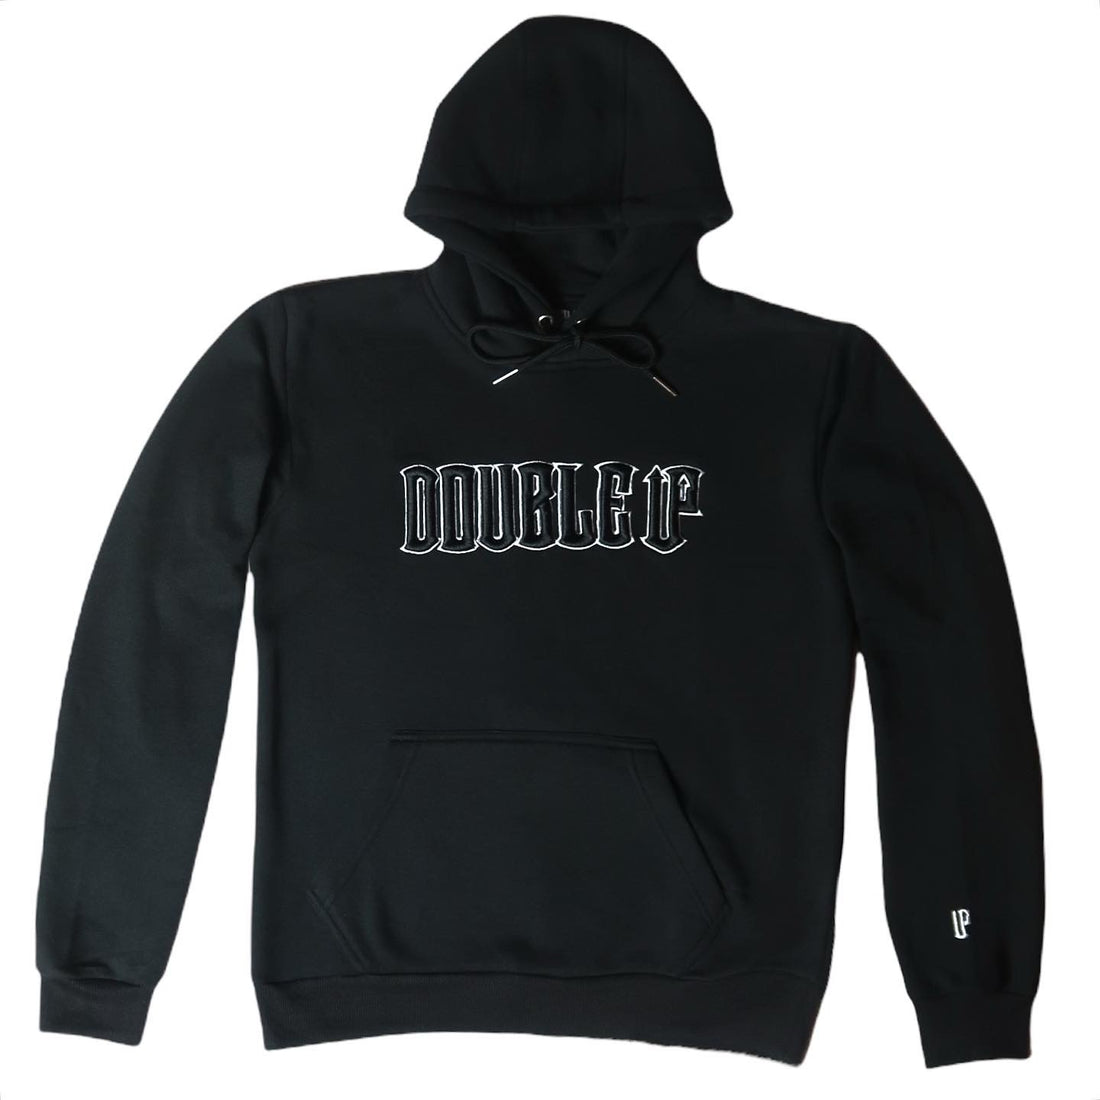 Double Up Hoodie - Black/White